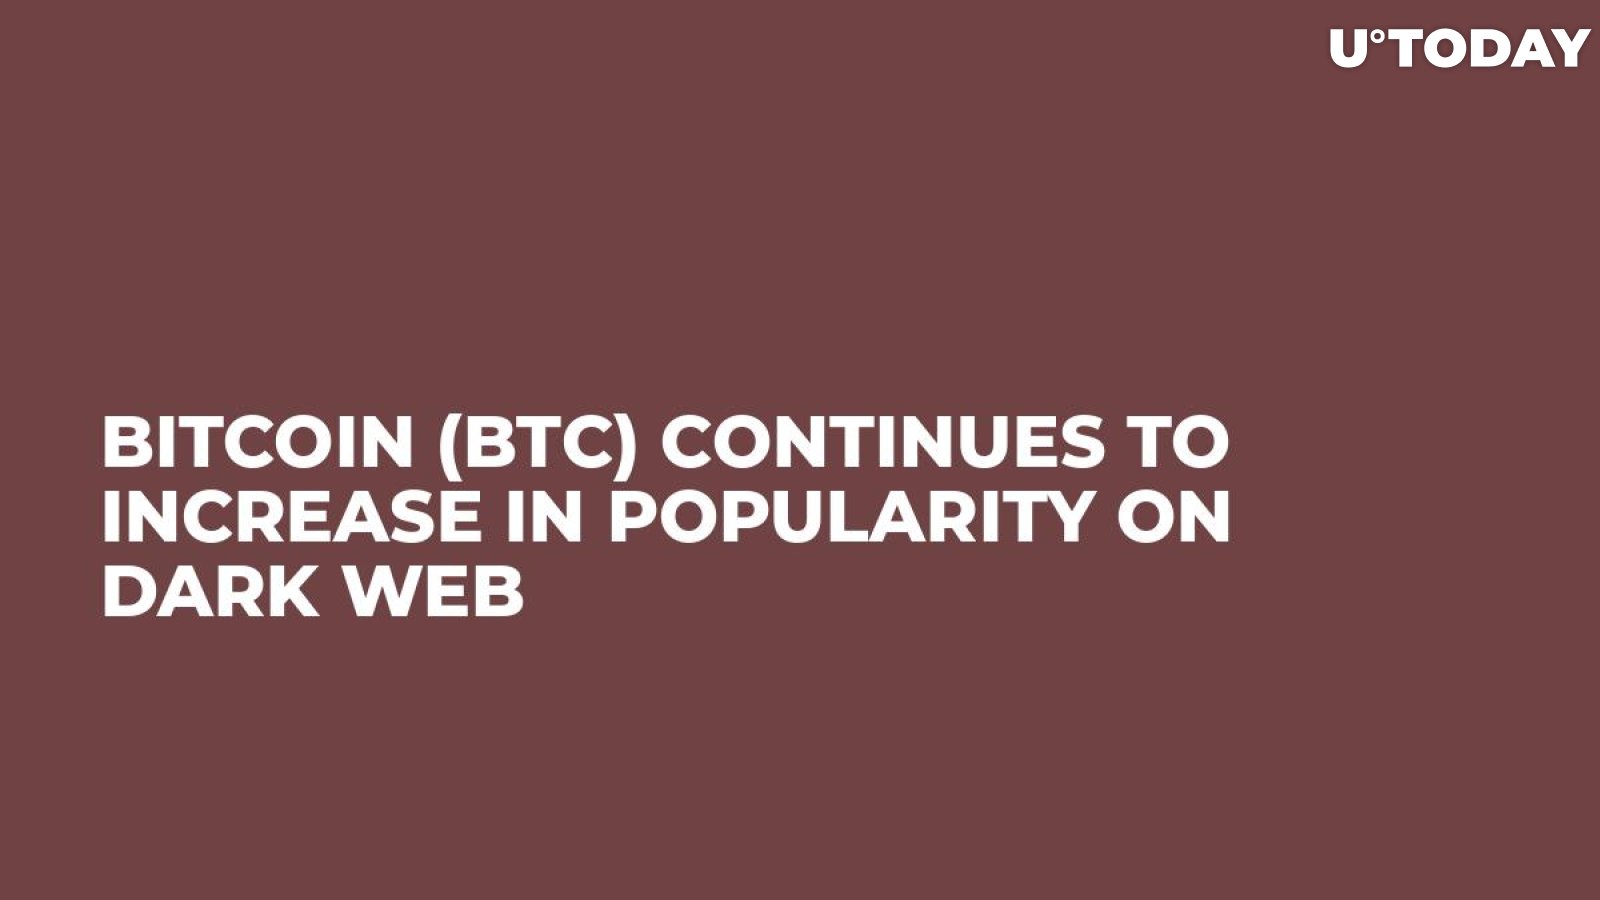 Bitcoin (BTC) Continues to Increase in Popularity on Dark Web